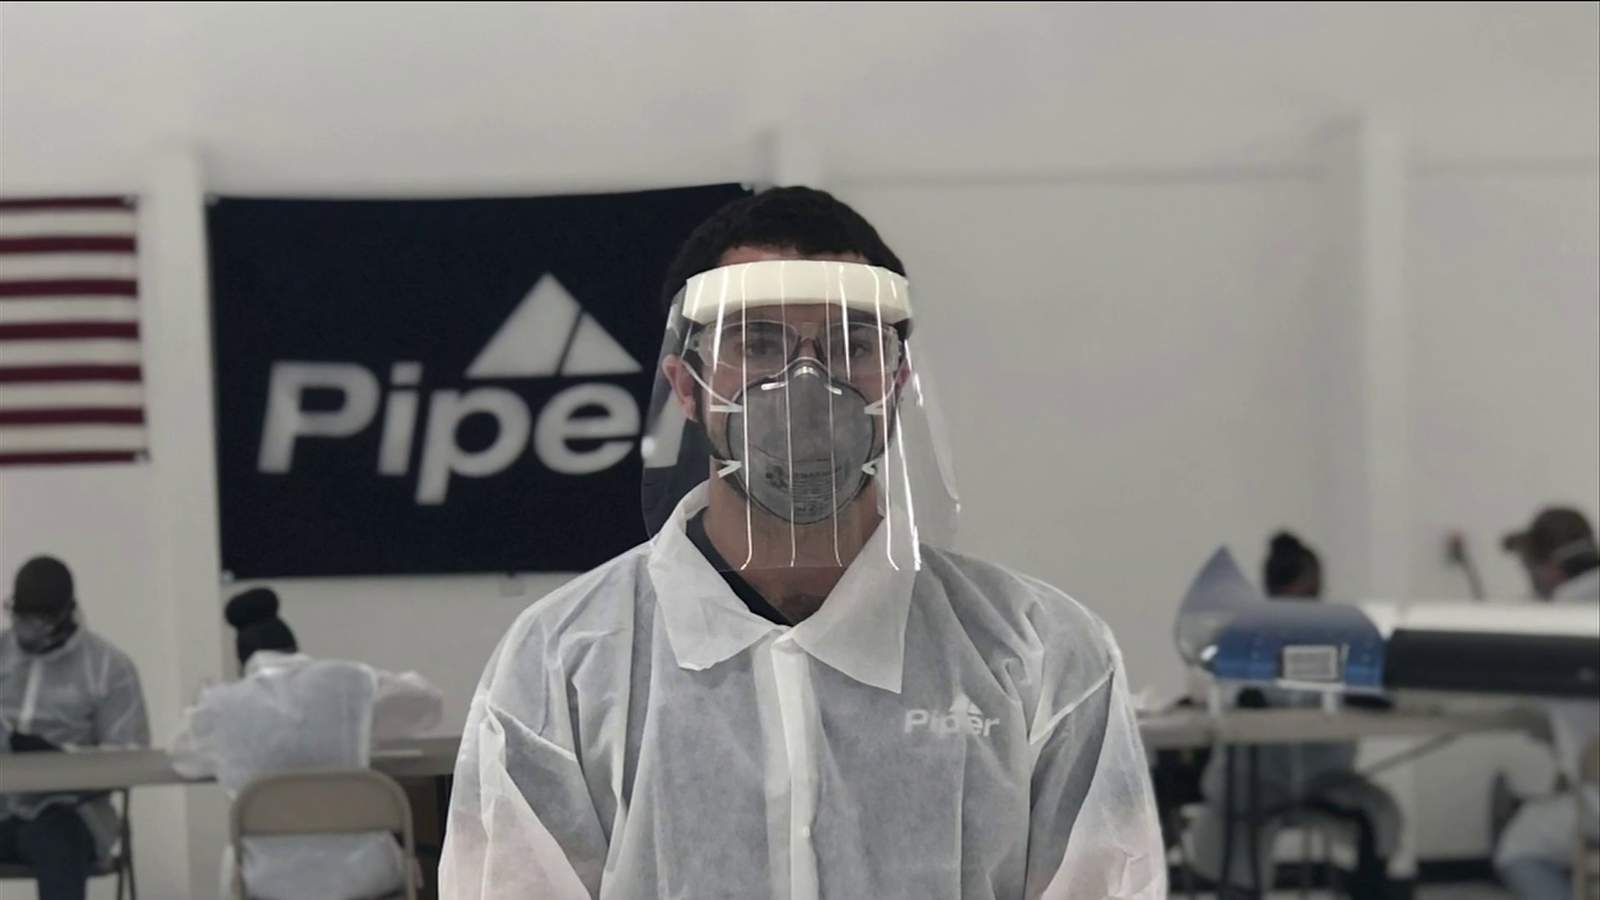 Florida aircraft manufacturer producing face shields for health care workers